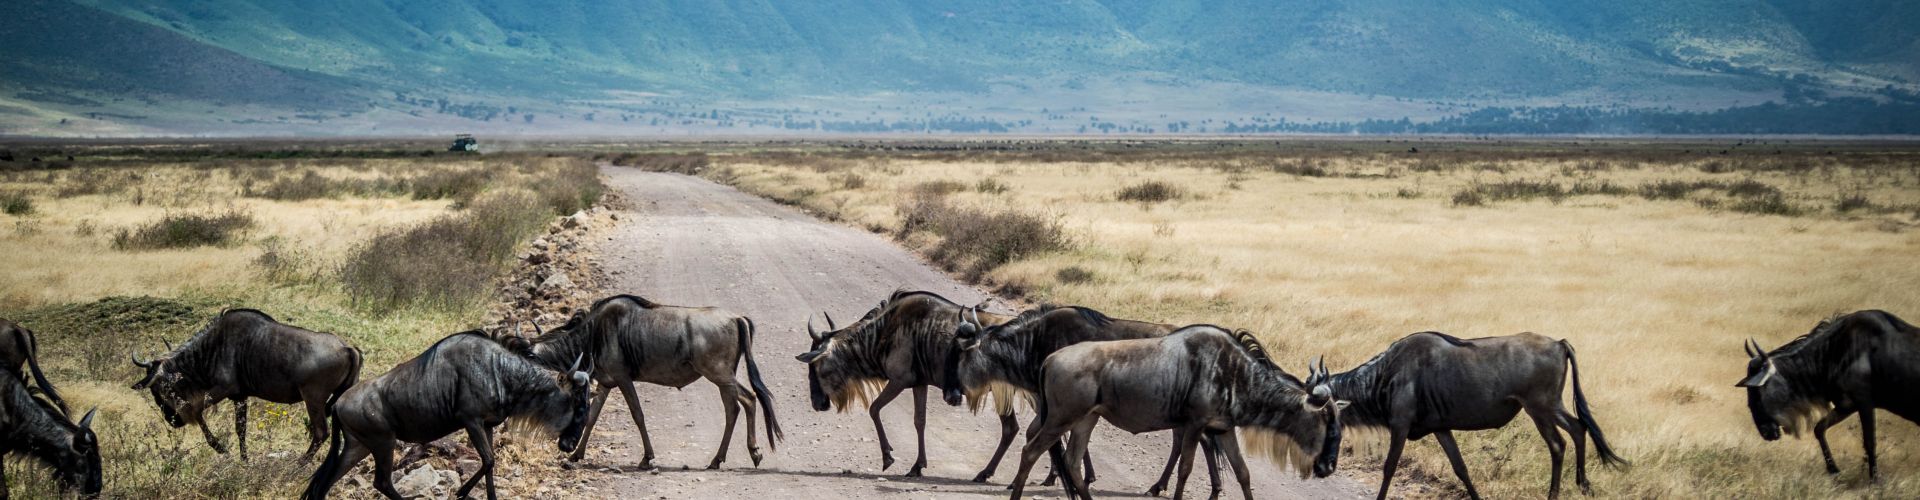 Wildebeests passing a rough road in Ngoronogro Crater